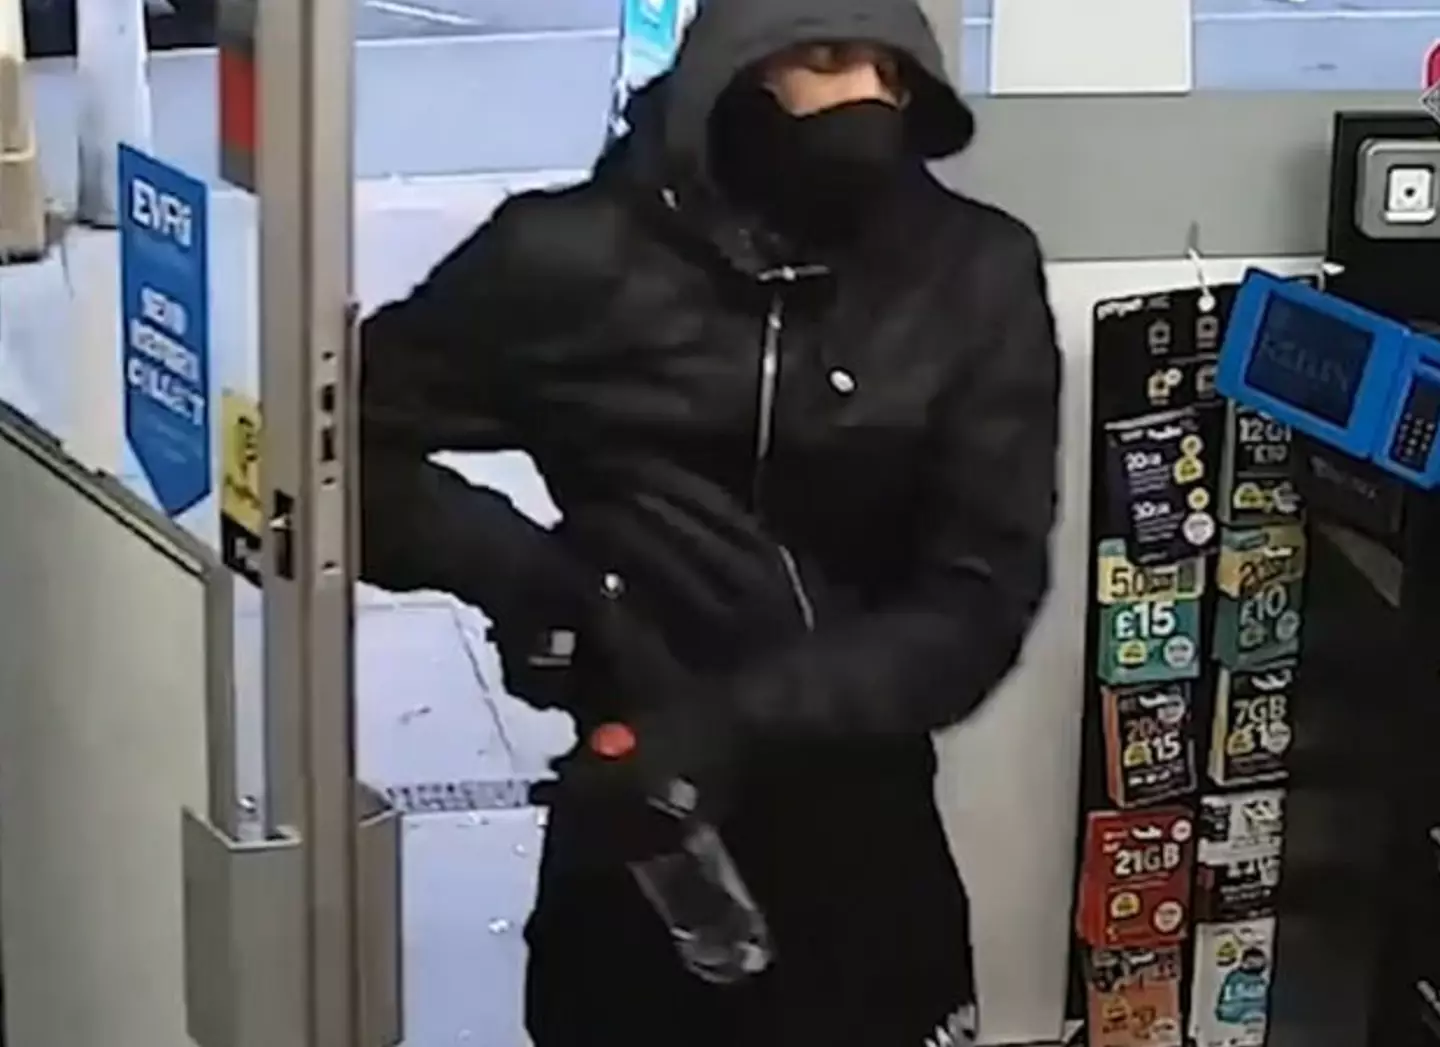 A shop worker is being hailed as a hero after courageously tackling gun-wielding robber.